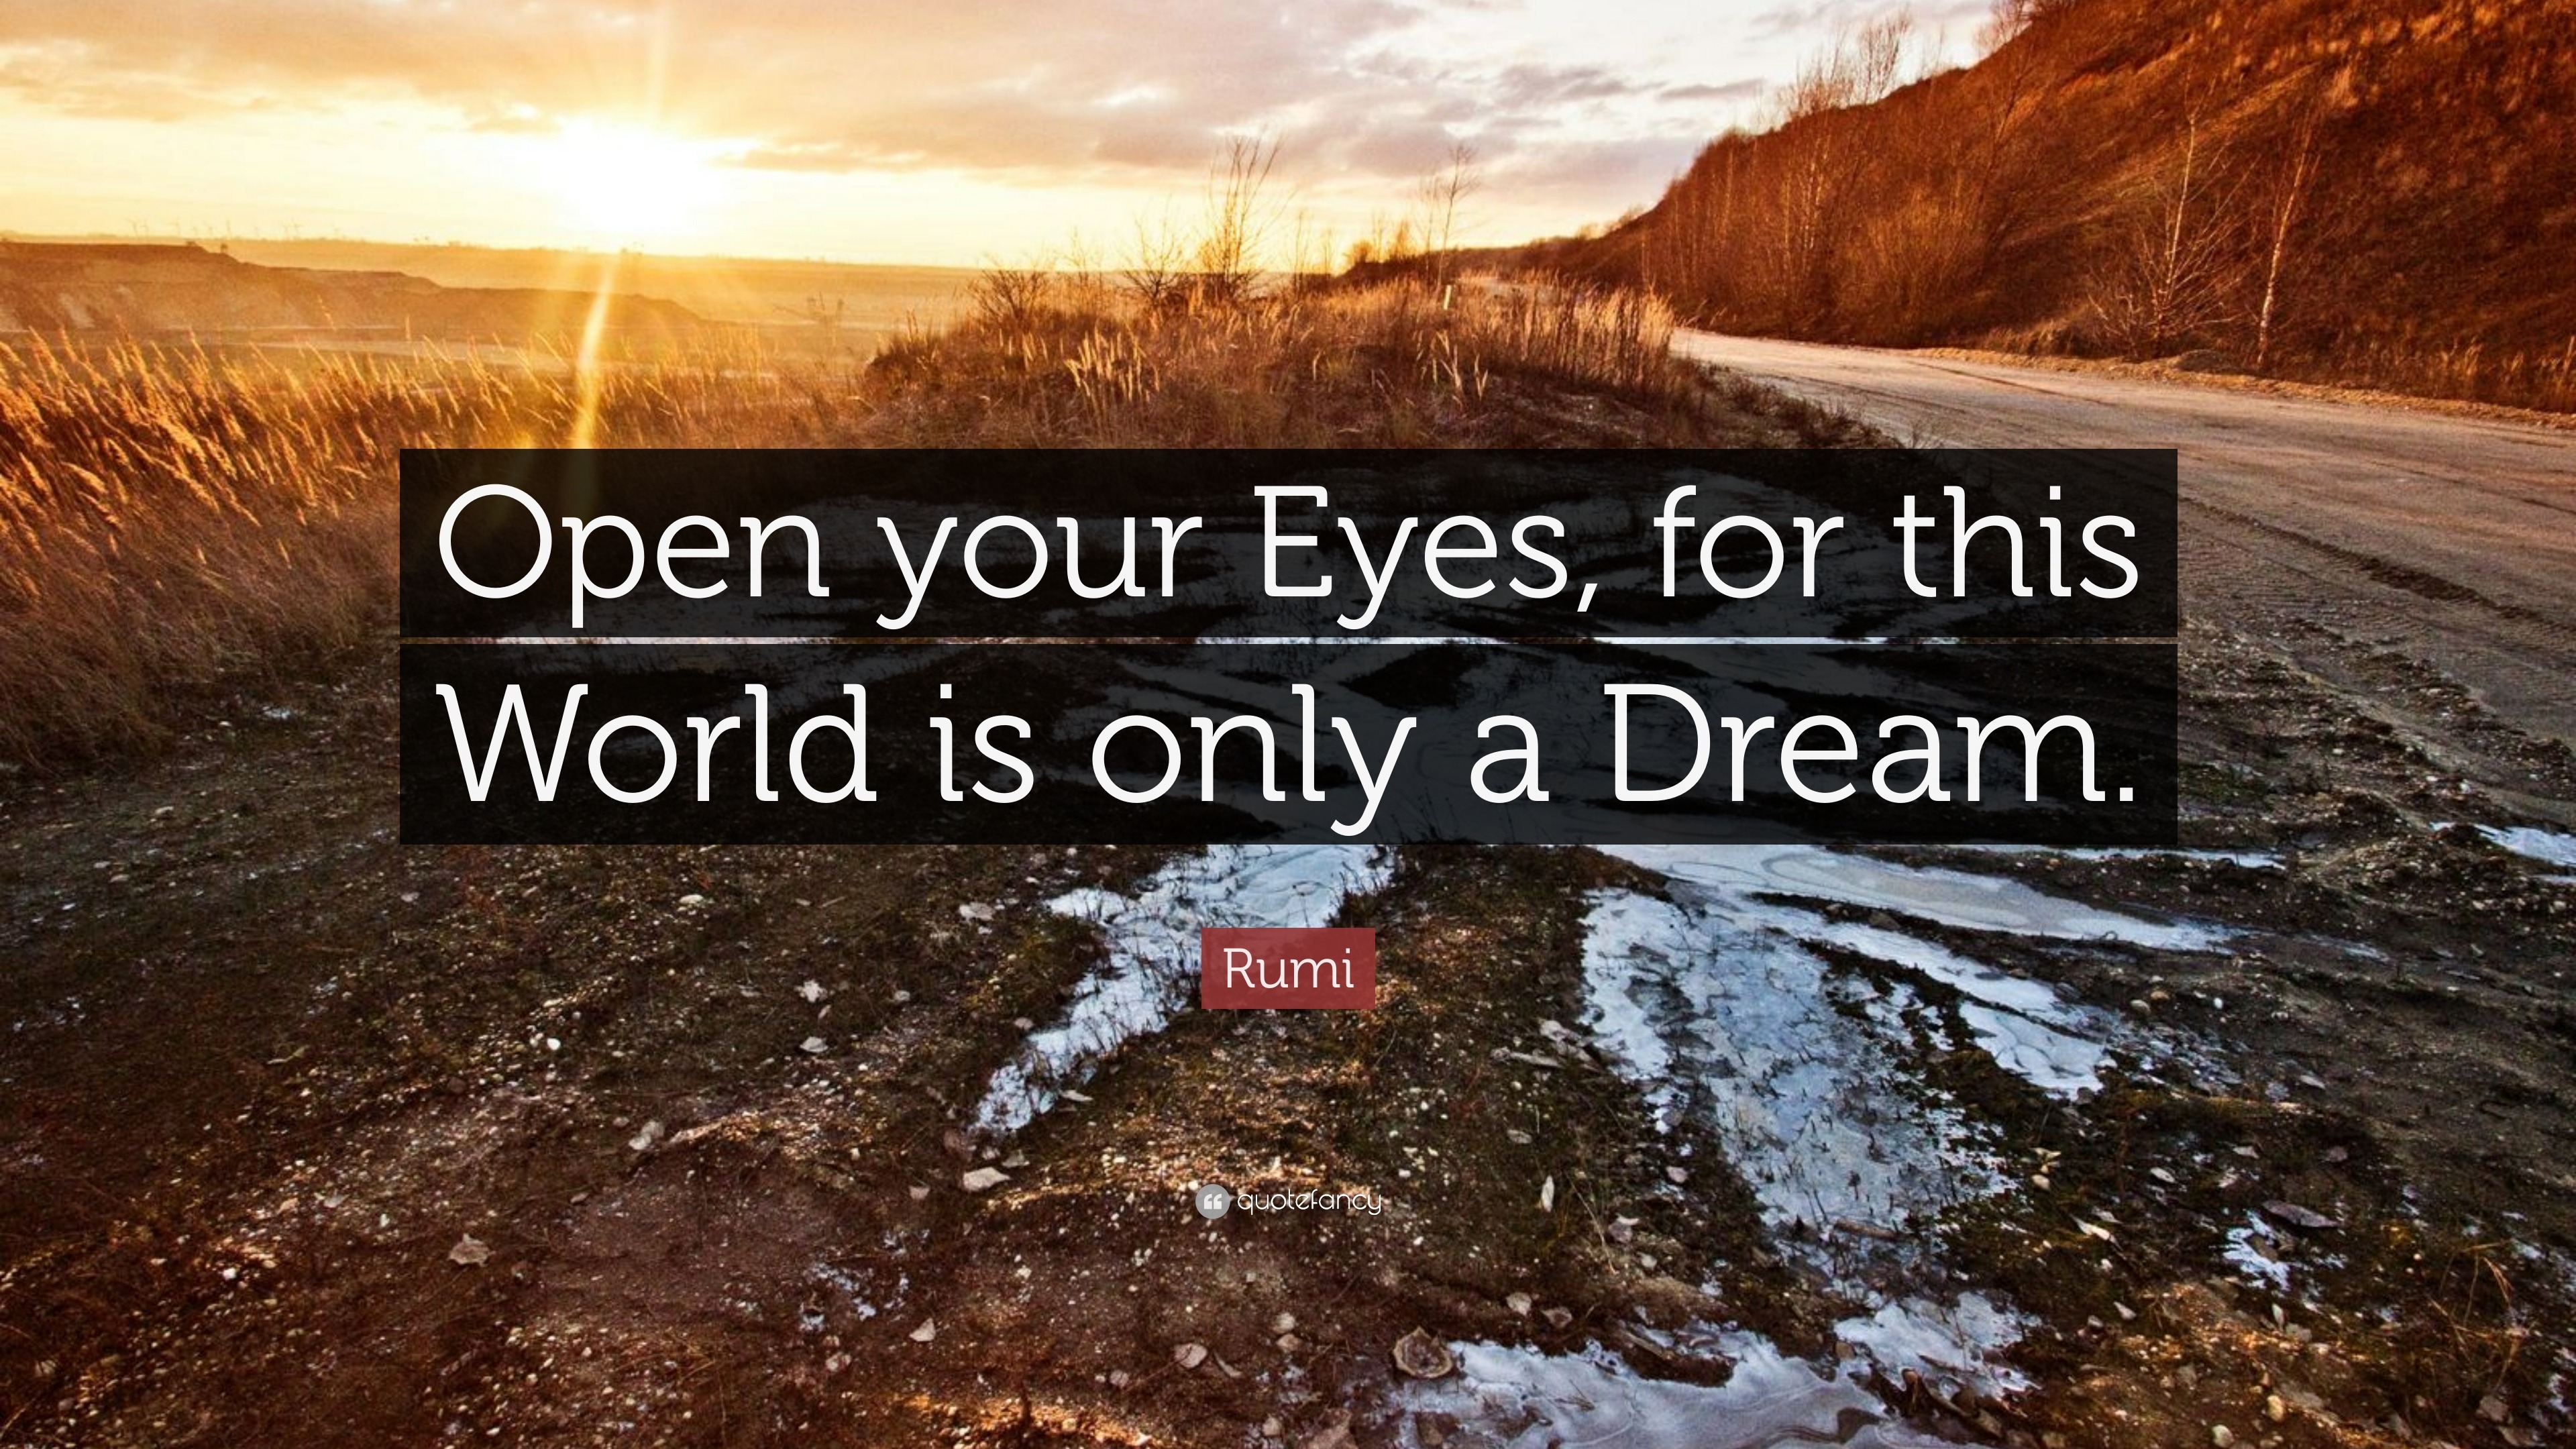 Rumi Quote “Open your Eyes for this World is only a Dream